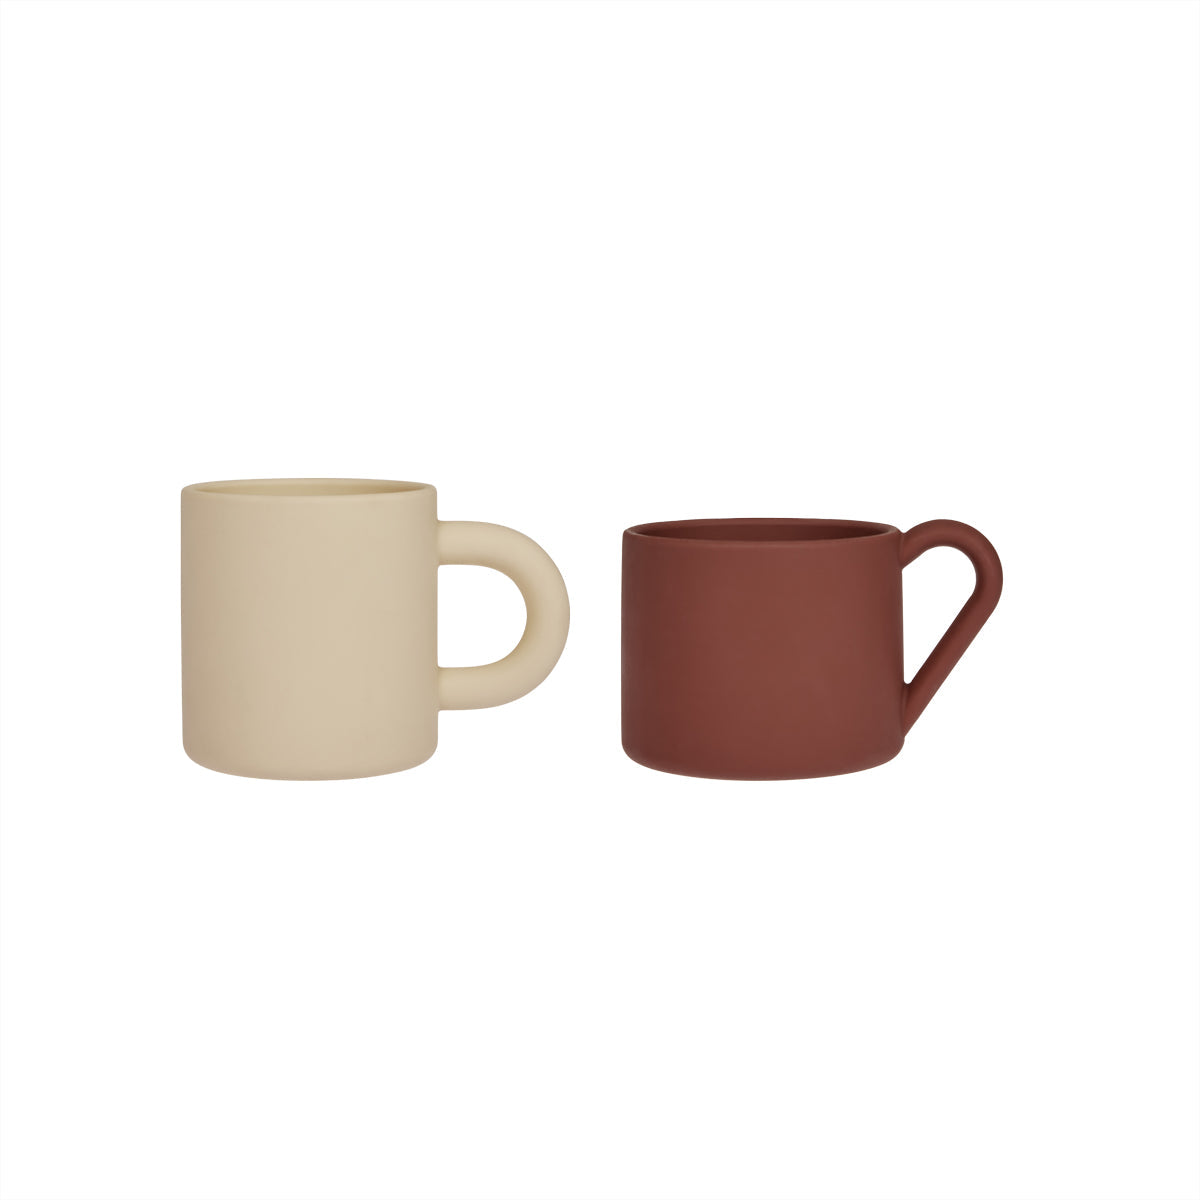 OYOY MINI Nomu Cups - Pack of 2 Dining Ware